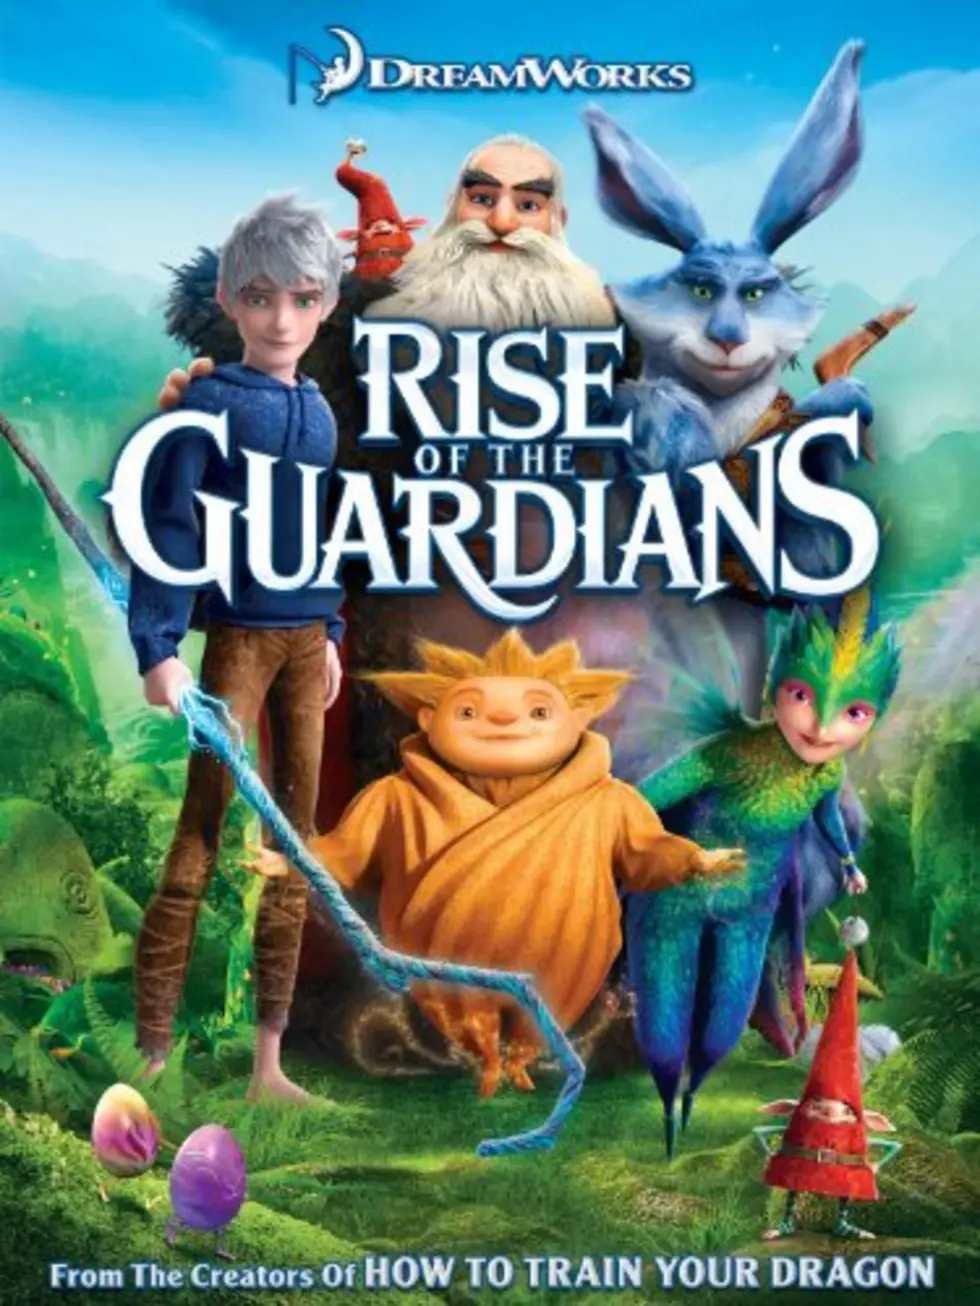 Tonight’s Free Downtown Movie is “Rise Of The Guardians”